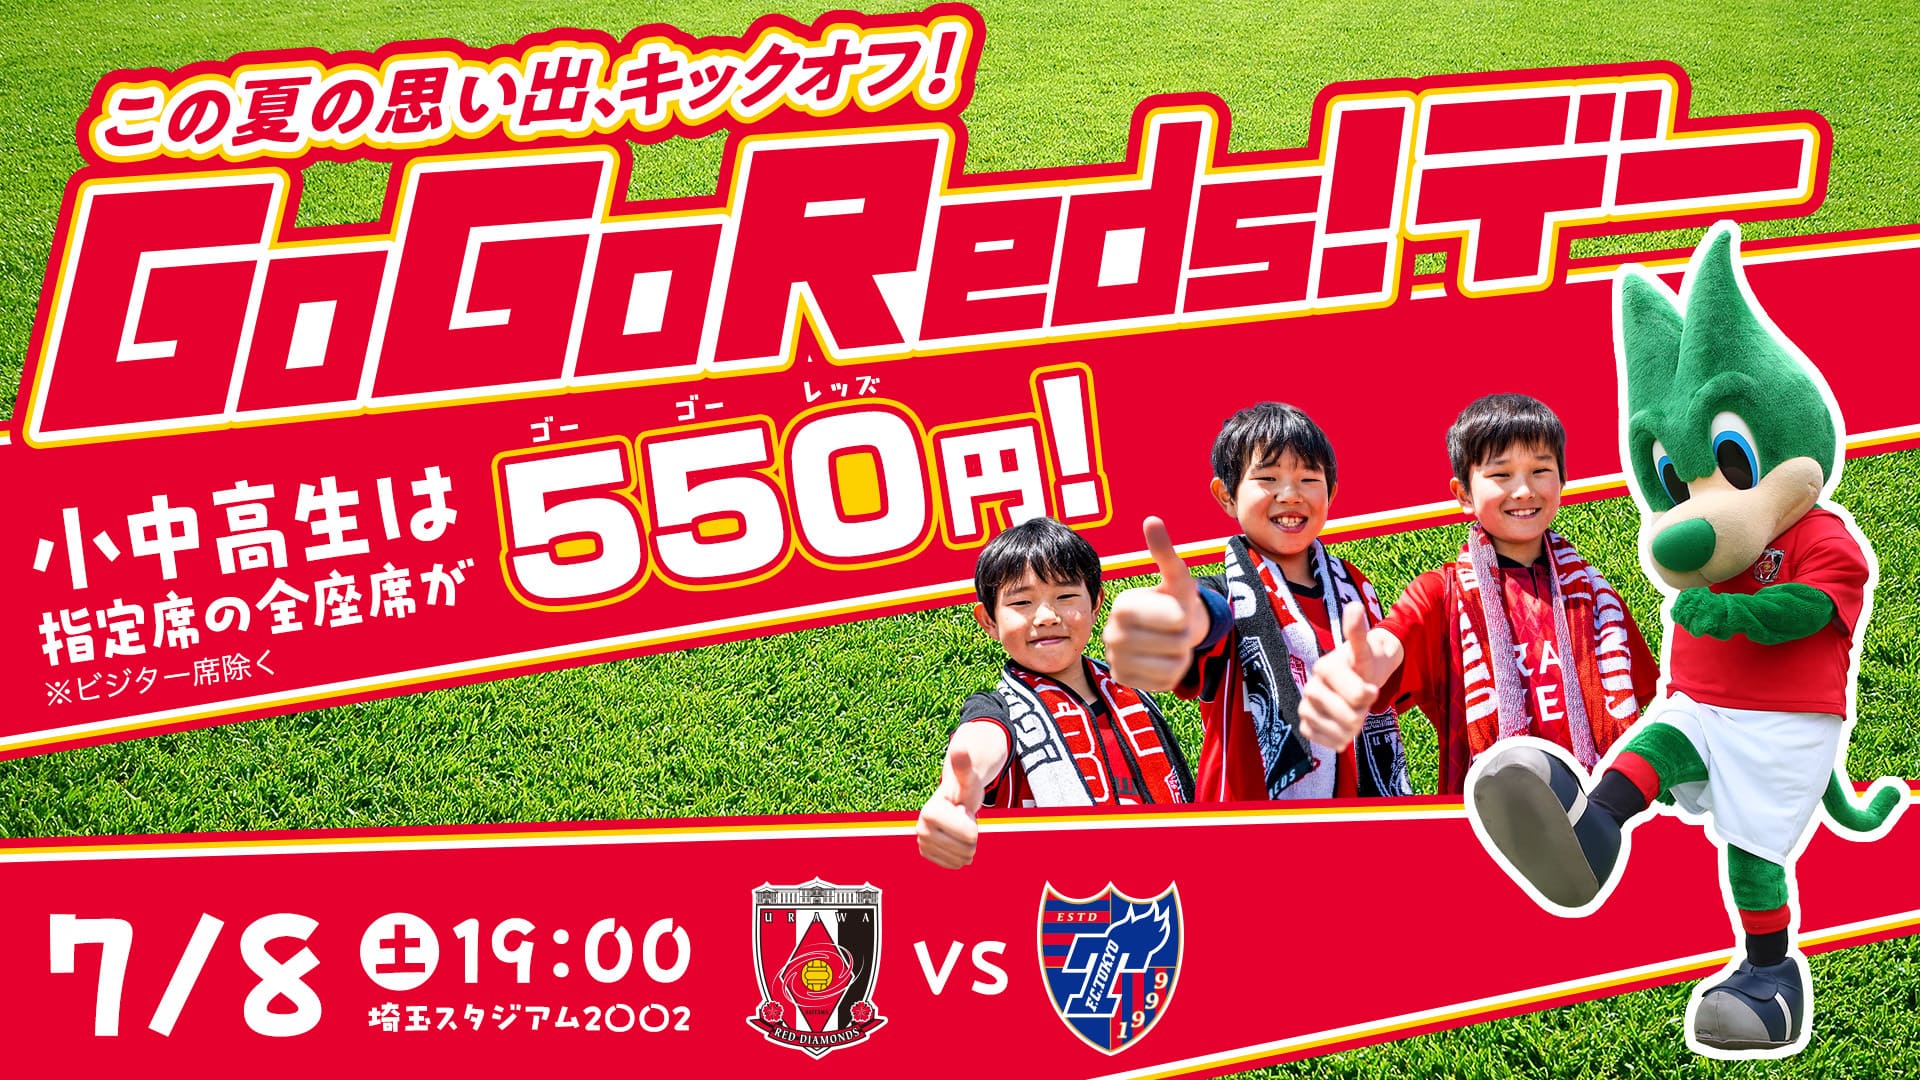 &quot;GoGoReds! Day&quot; is full of events! 550 yen gourmet only available on this day!